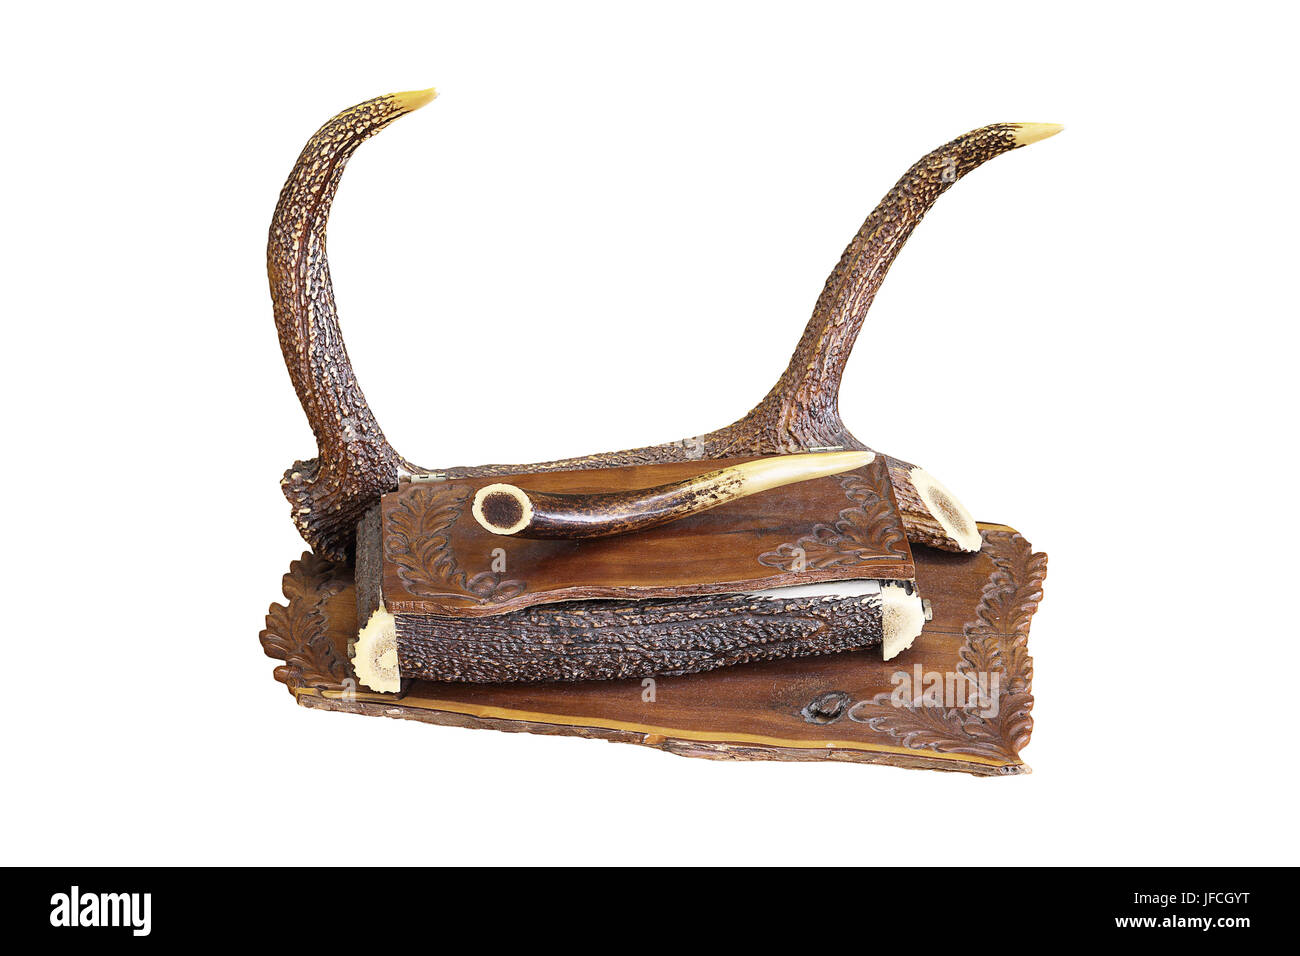 ancient piece of furniture with hunting motifs, isolation of handmade drawer over white background; it is made from wood and red deer pieces of antler Stock Photo